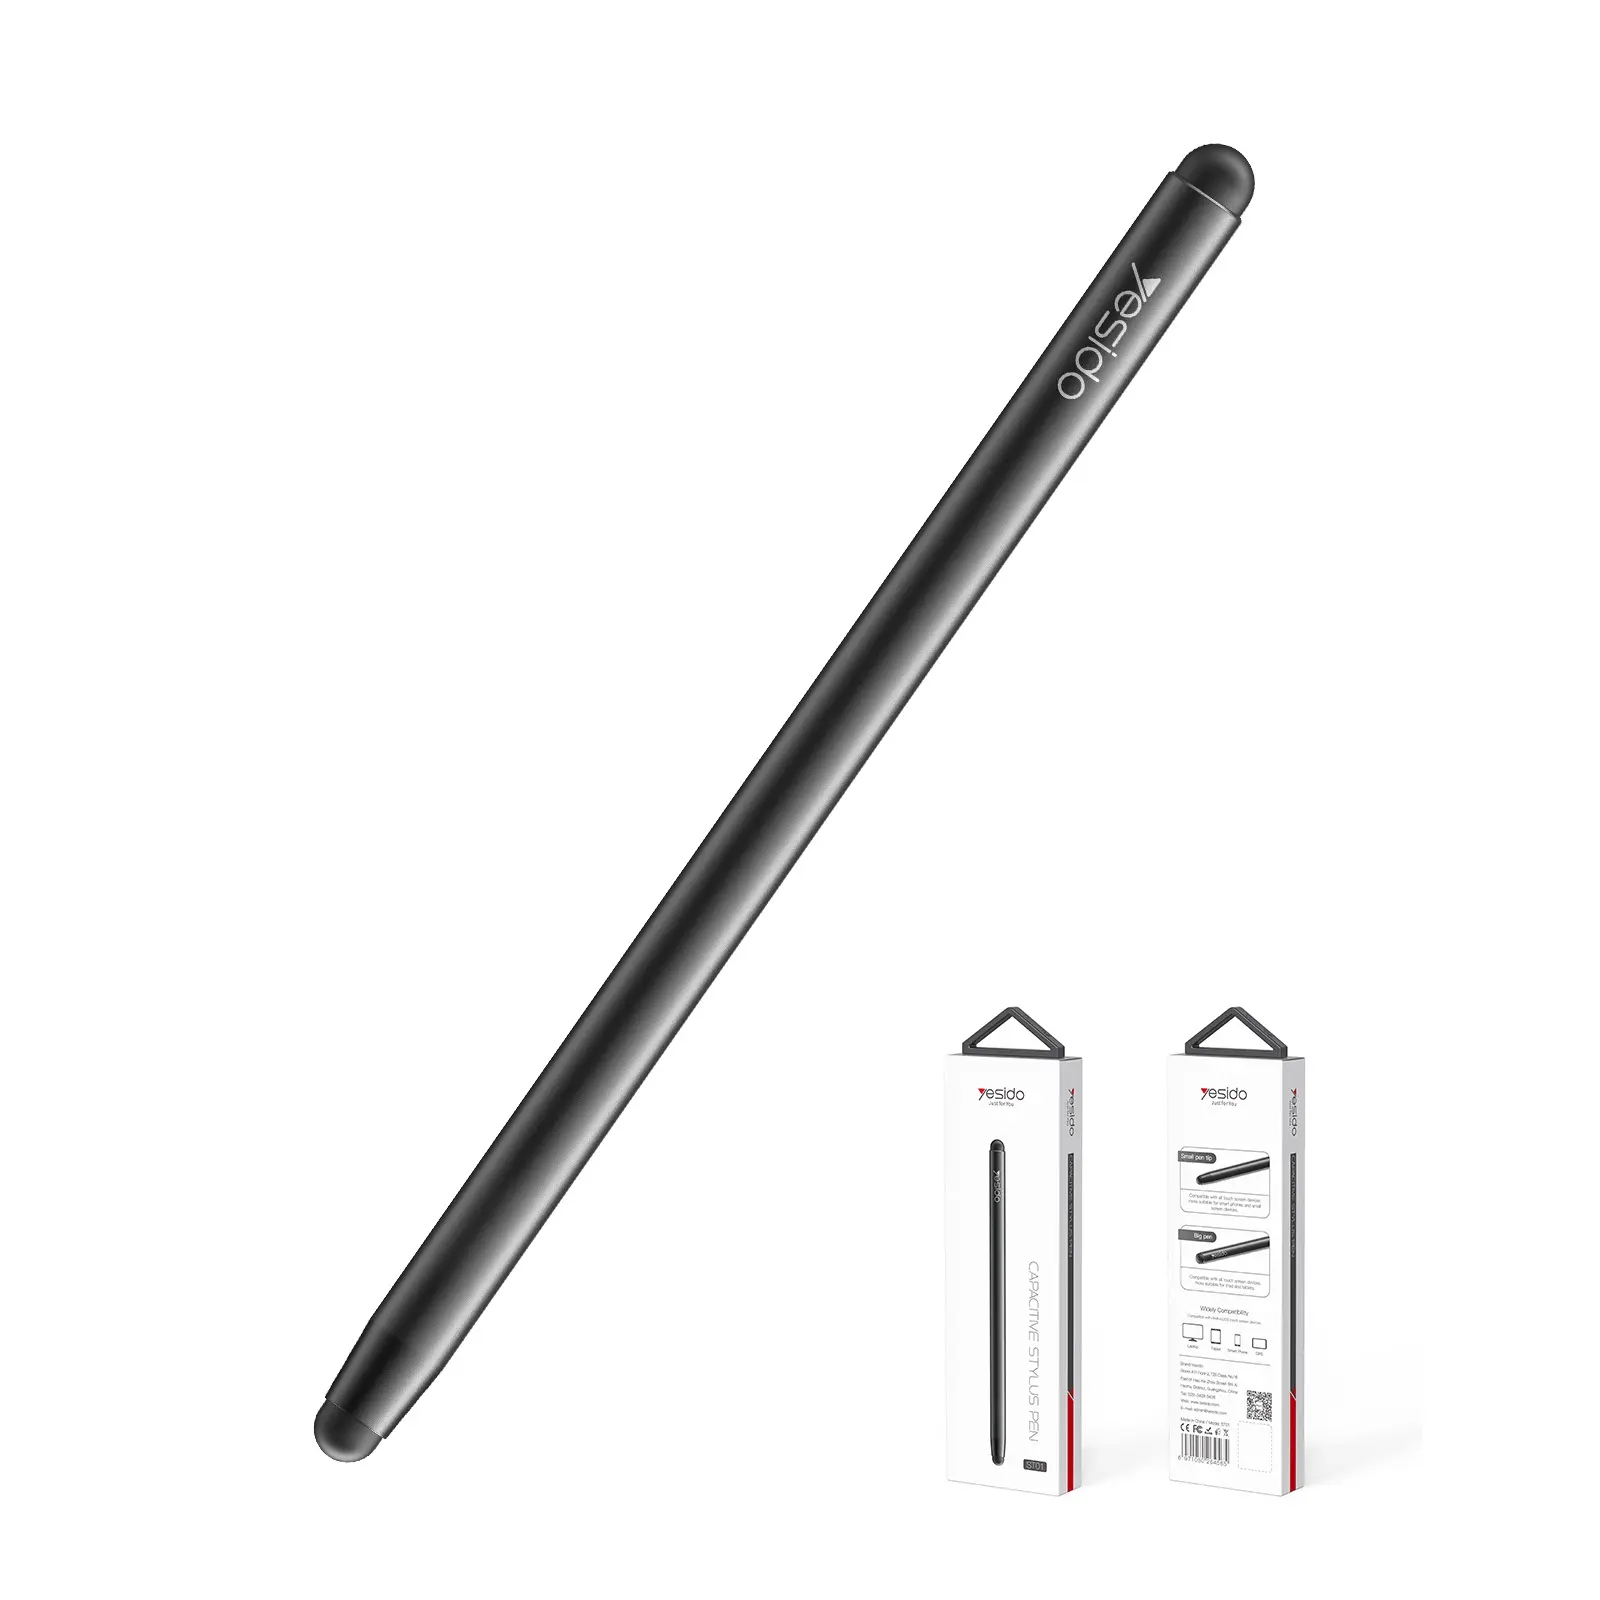 ST01 2 In 1 Capacitive Active Tablet Smart Pressure Touch Screen Stylus Pencil Pen For IP Android Laptop